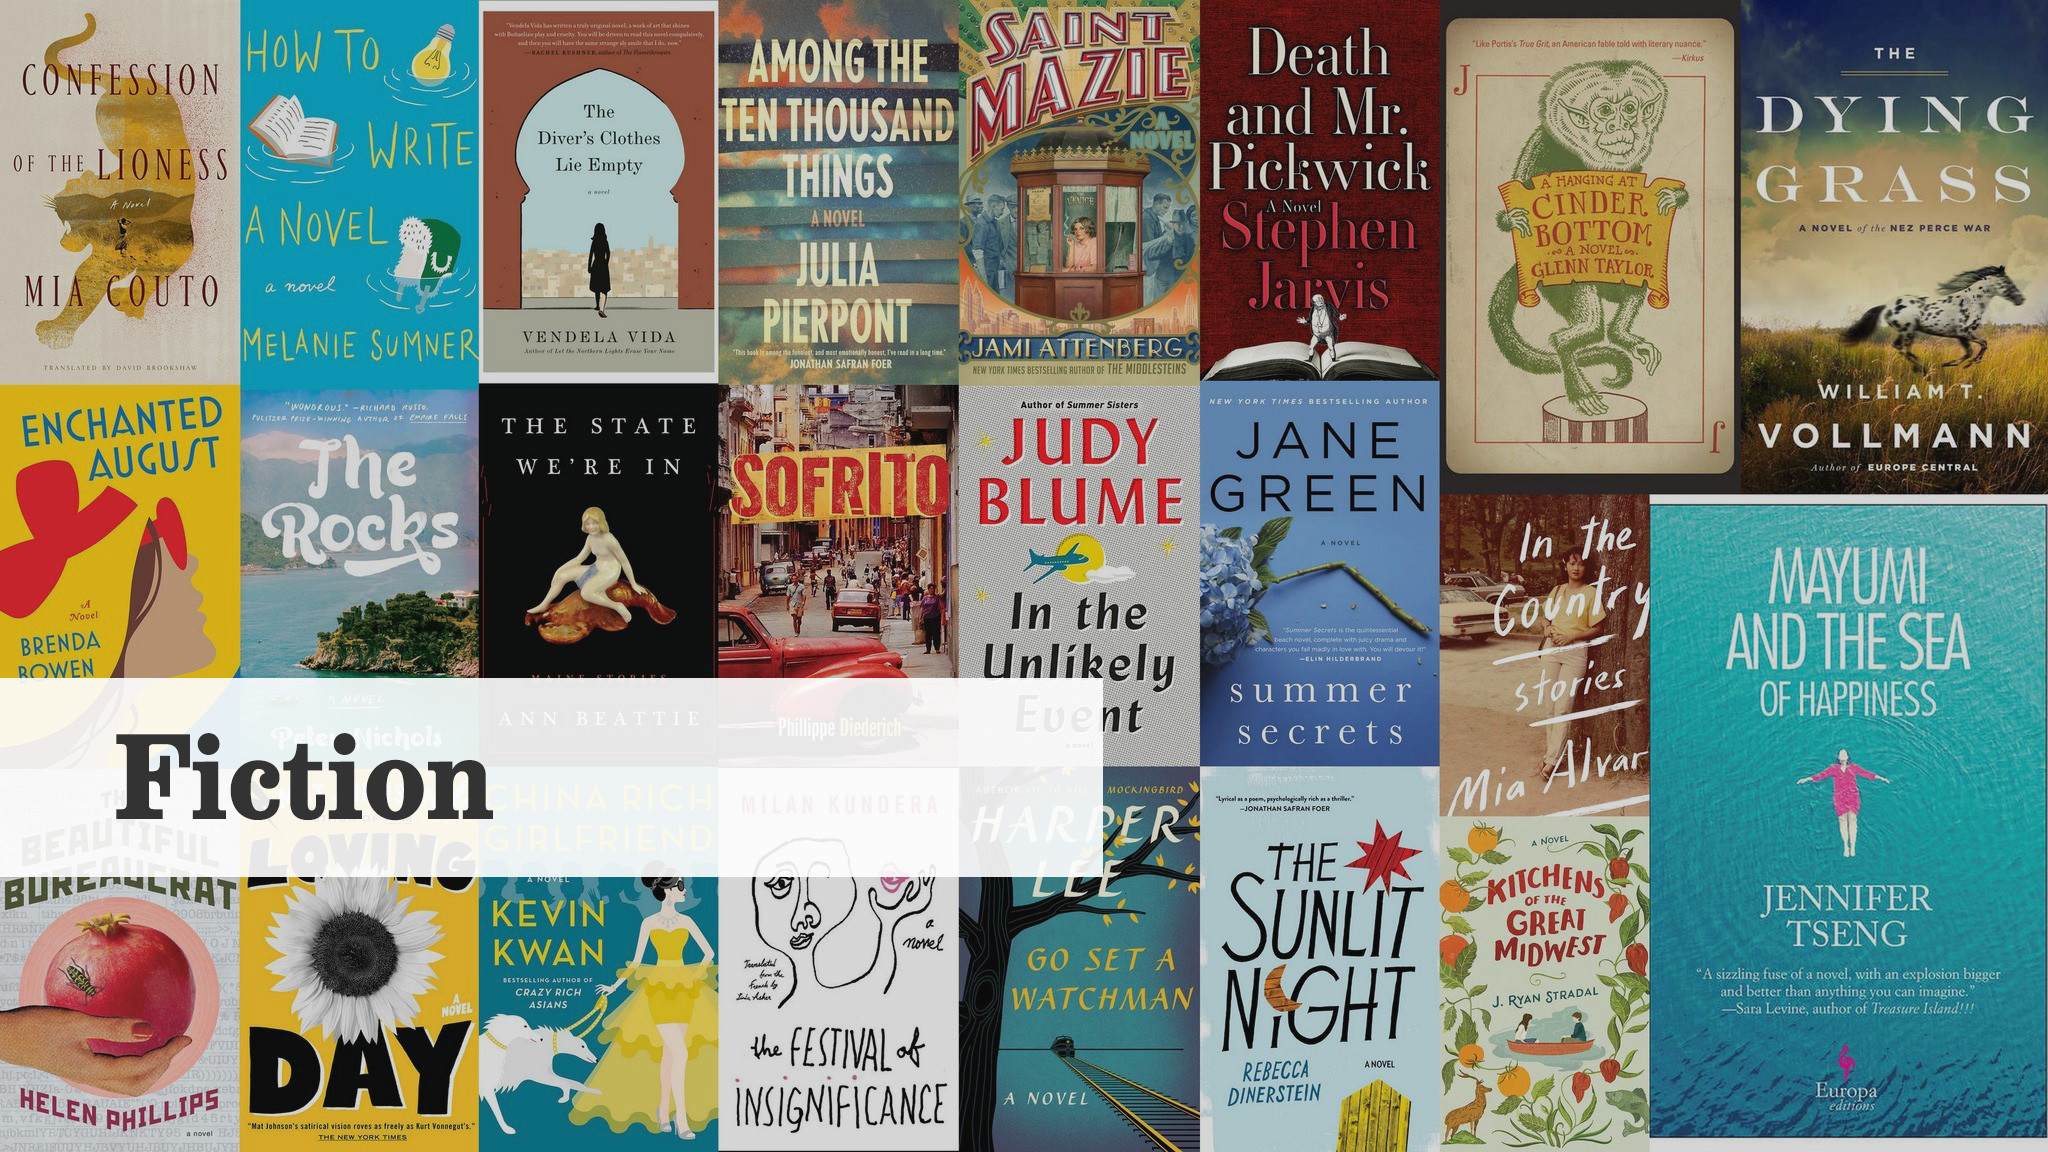 Summer reading guide: The 136 books you'll want to read